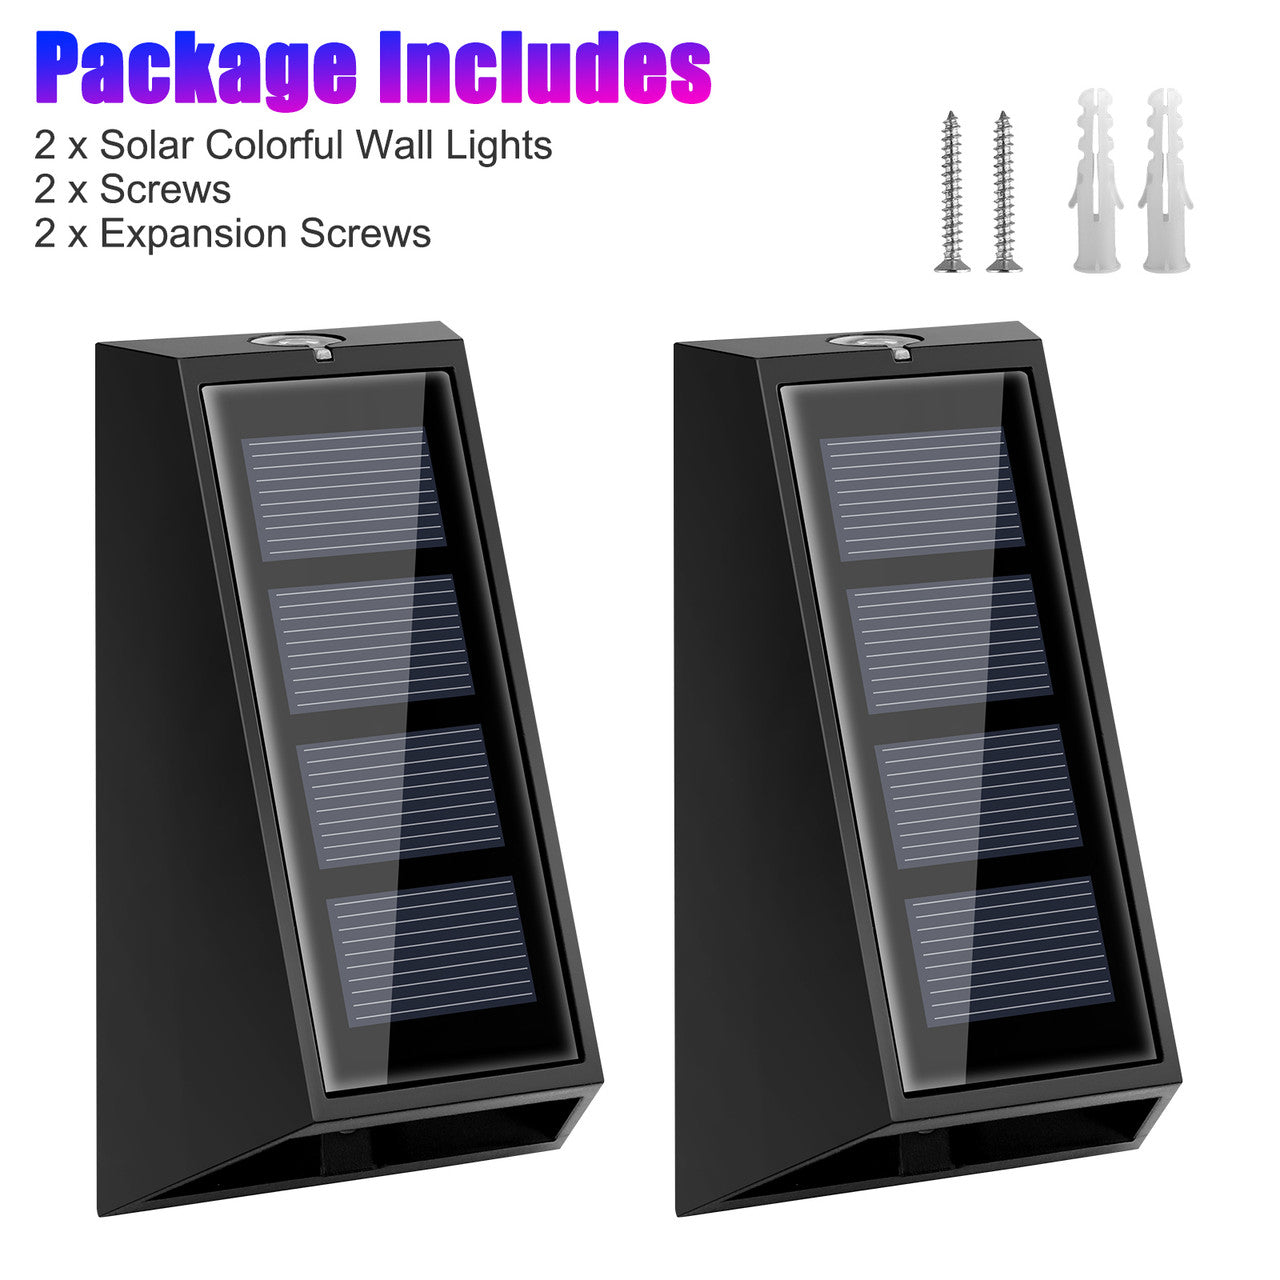 Solar Colorful Wall Light with a Solar Power Supply, Waterproof and Easy to Install